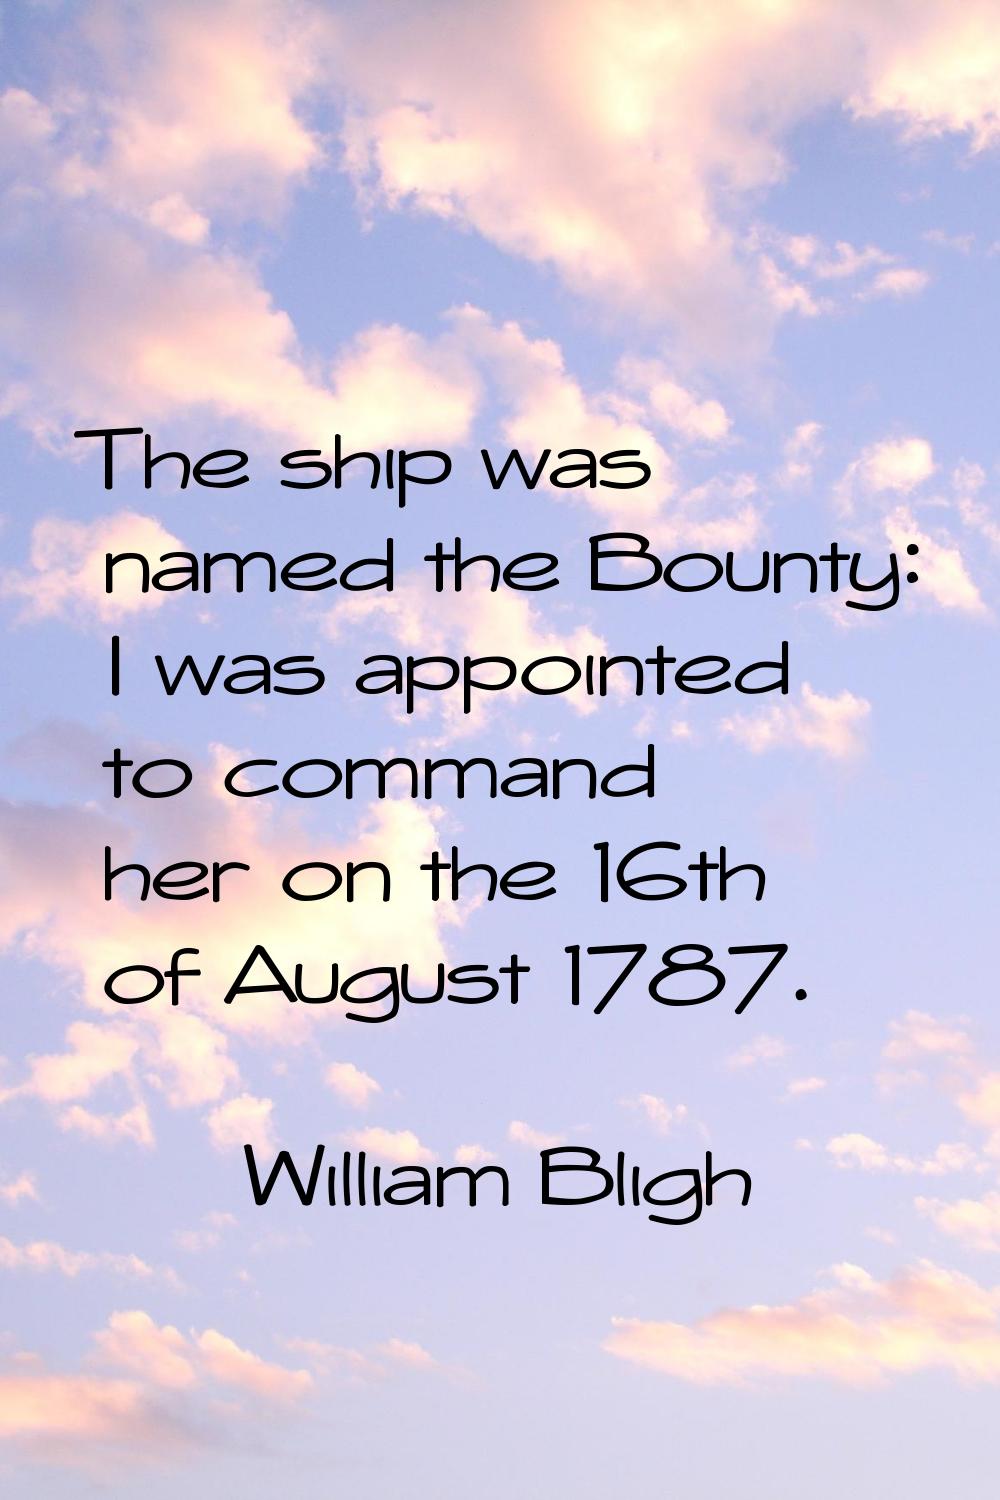 The ship was named the Bounty: I was appointed to command her on the 16th of August 1787.